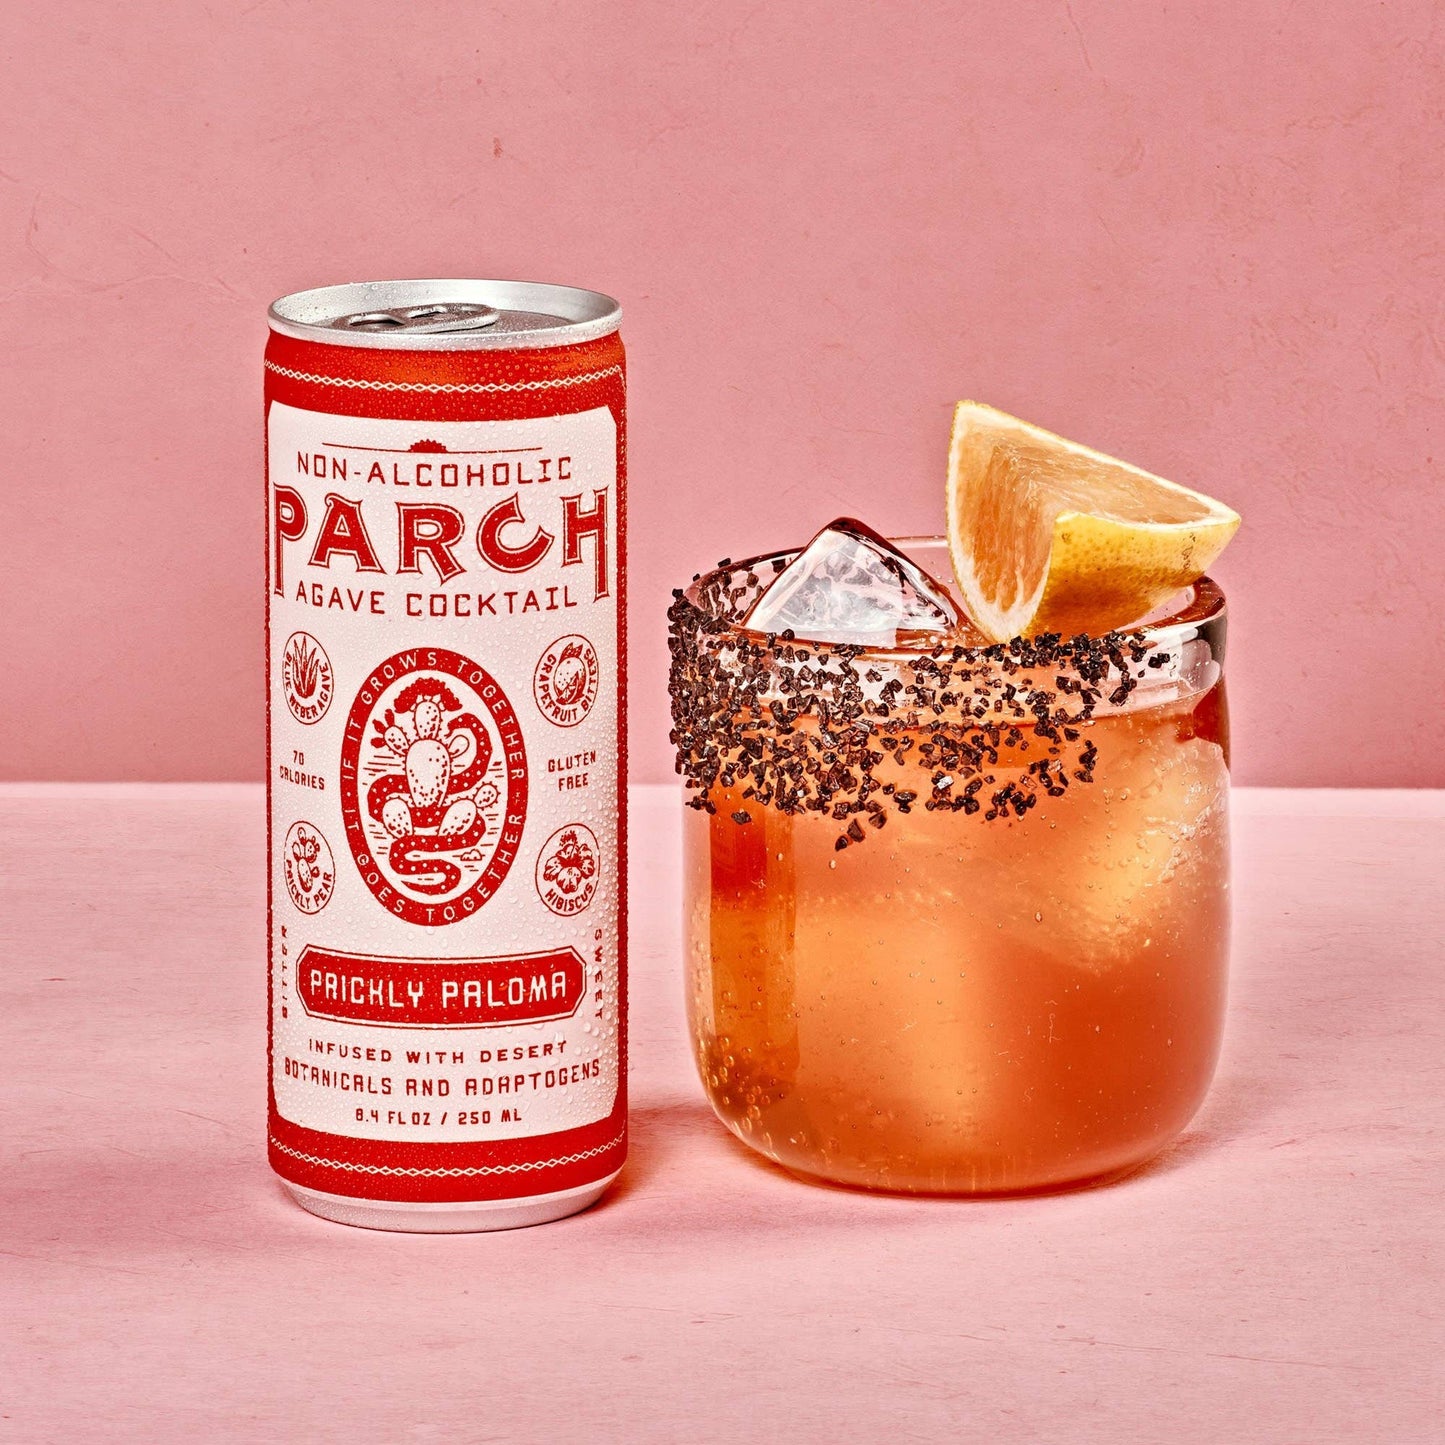 PARCH - Prickly Paloma Non-Alcoholic Agave Cocktail